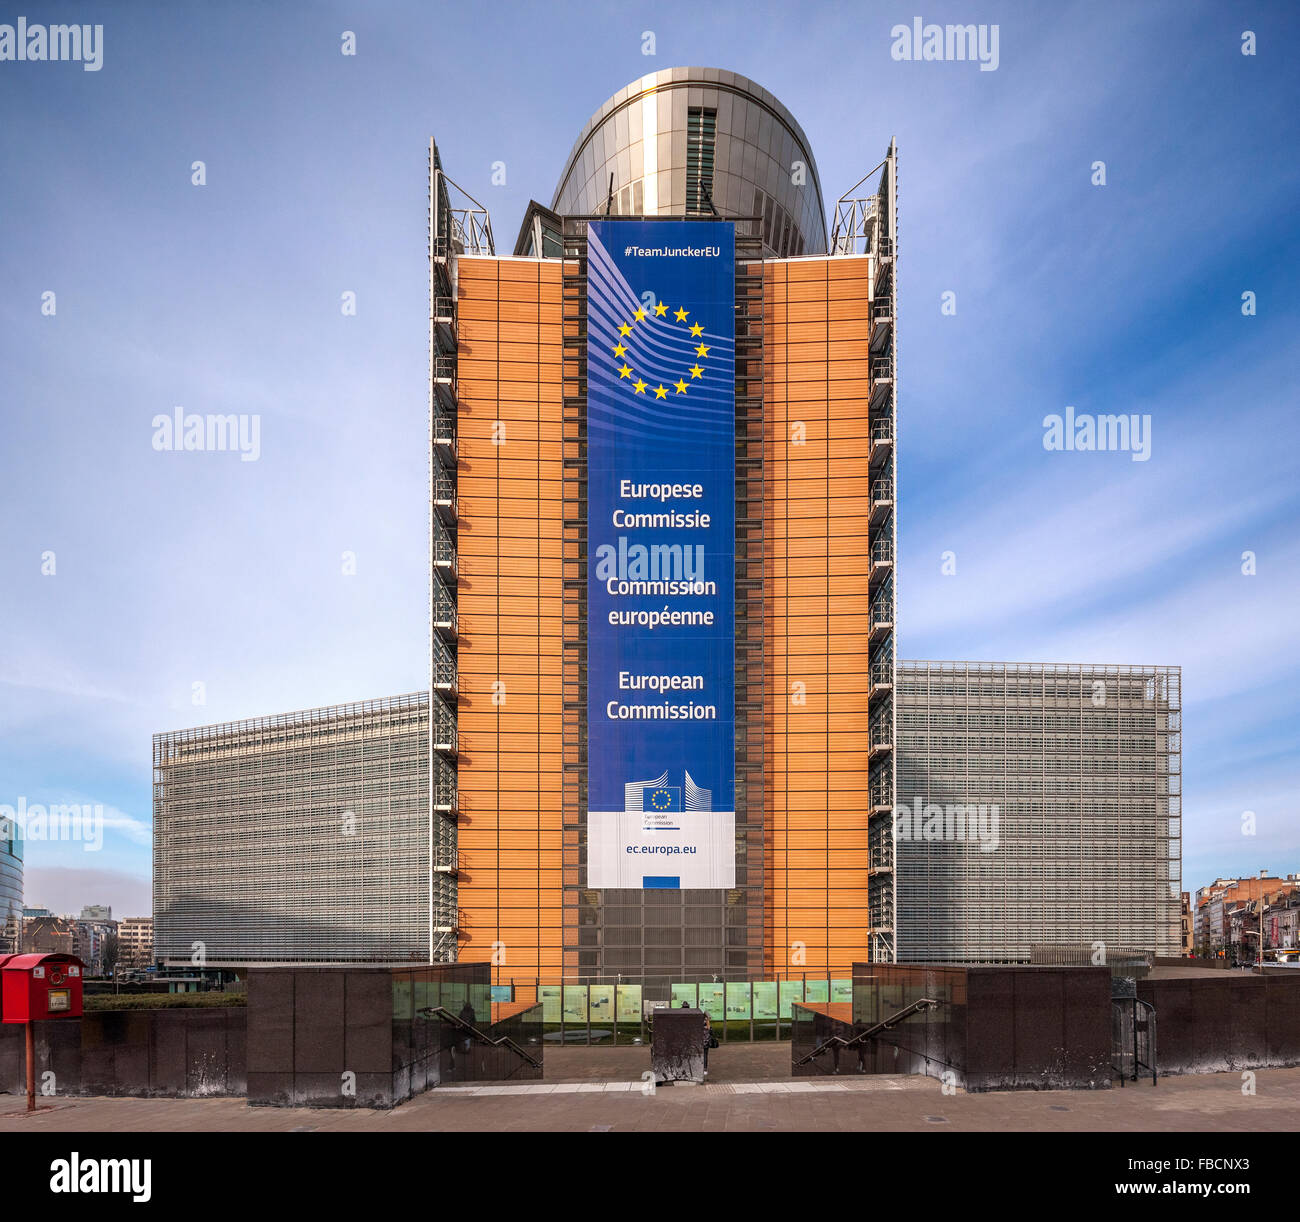 Brussels Berlaymont Building. Headquarters of the European Commission, EC, the executive of the European Union, EU. Brussel Bruxelles Belgium Europe Stock Photo